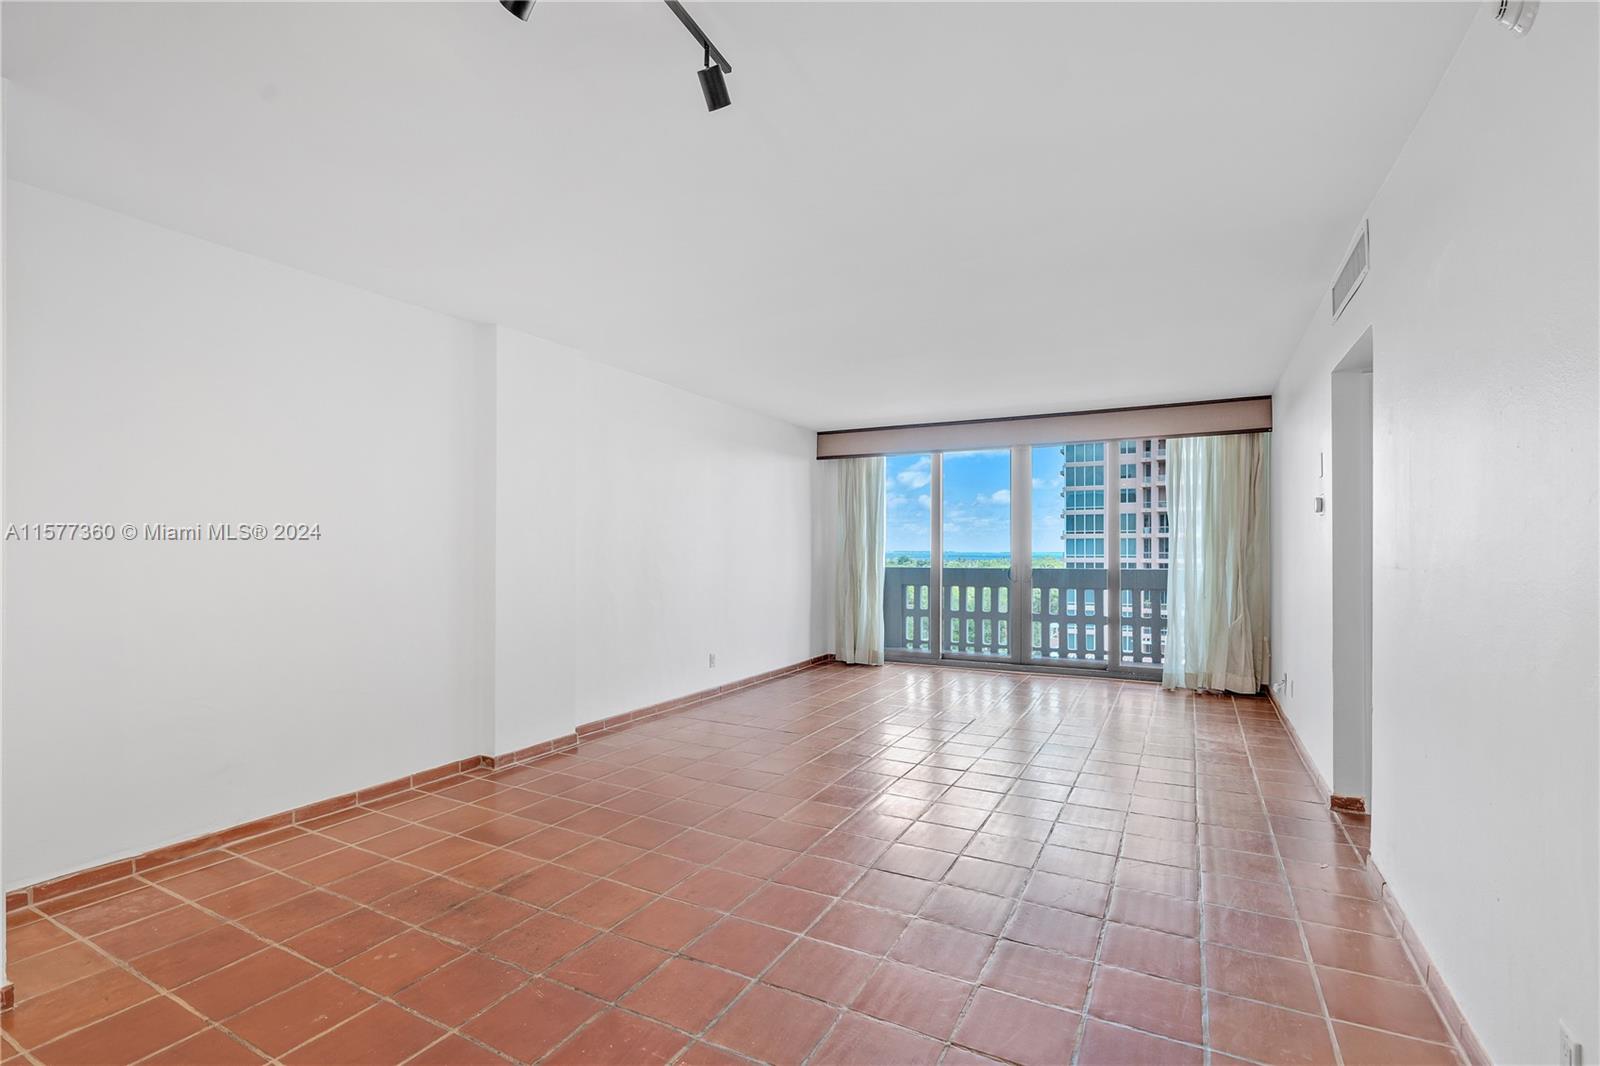 90 Edgewater Dr #908, Coral Gables FL 33133